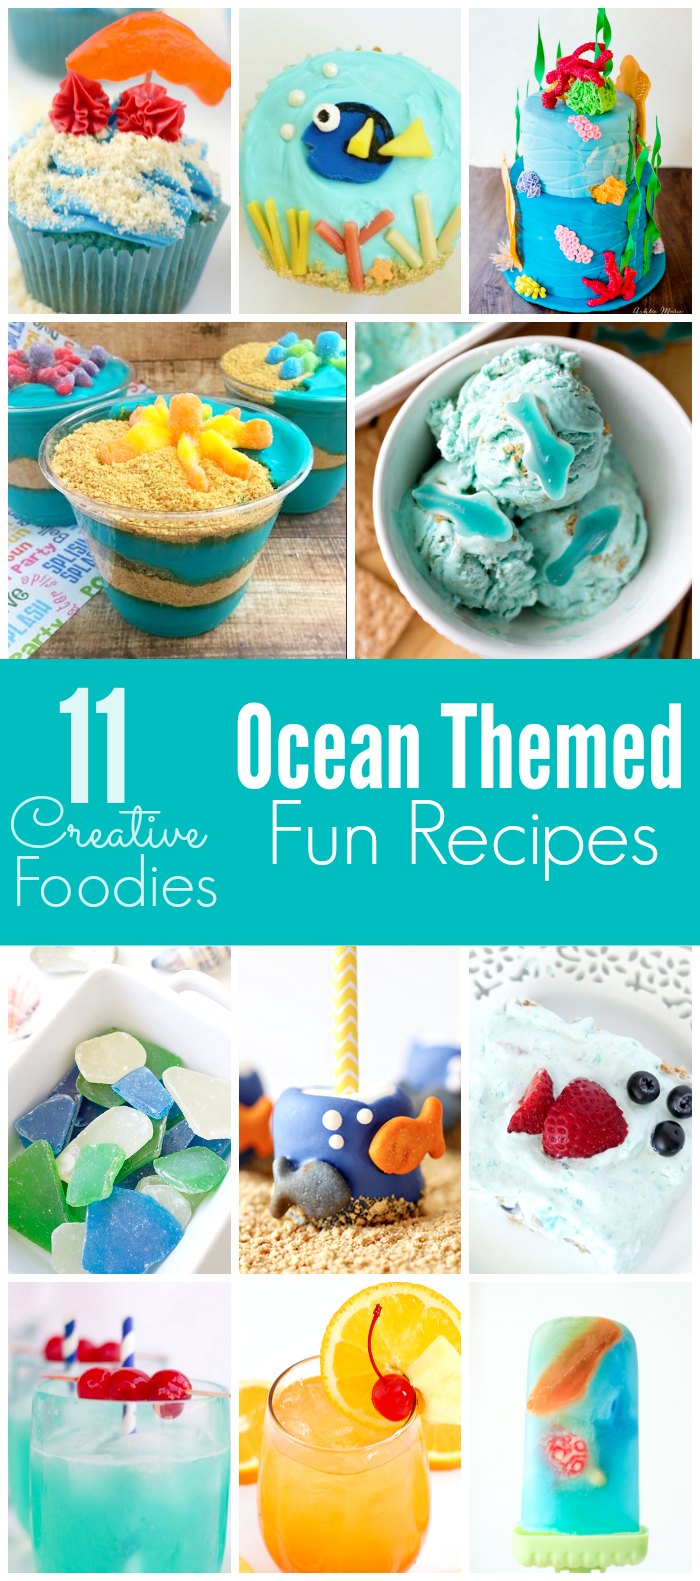 Ten Ocean Themed Recipes and party food